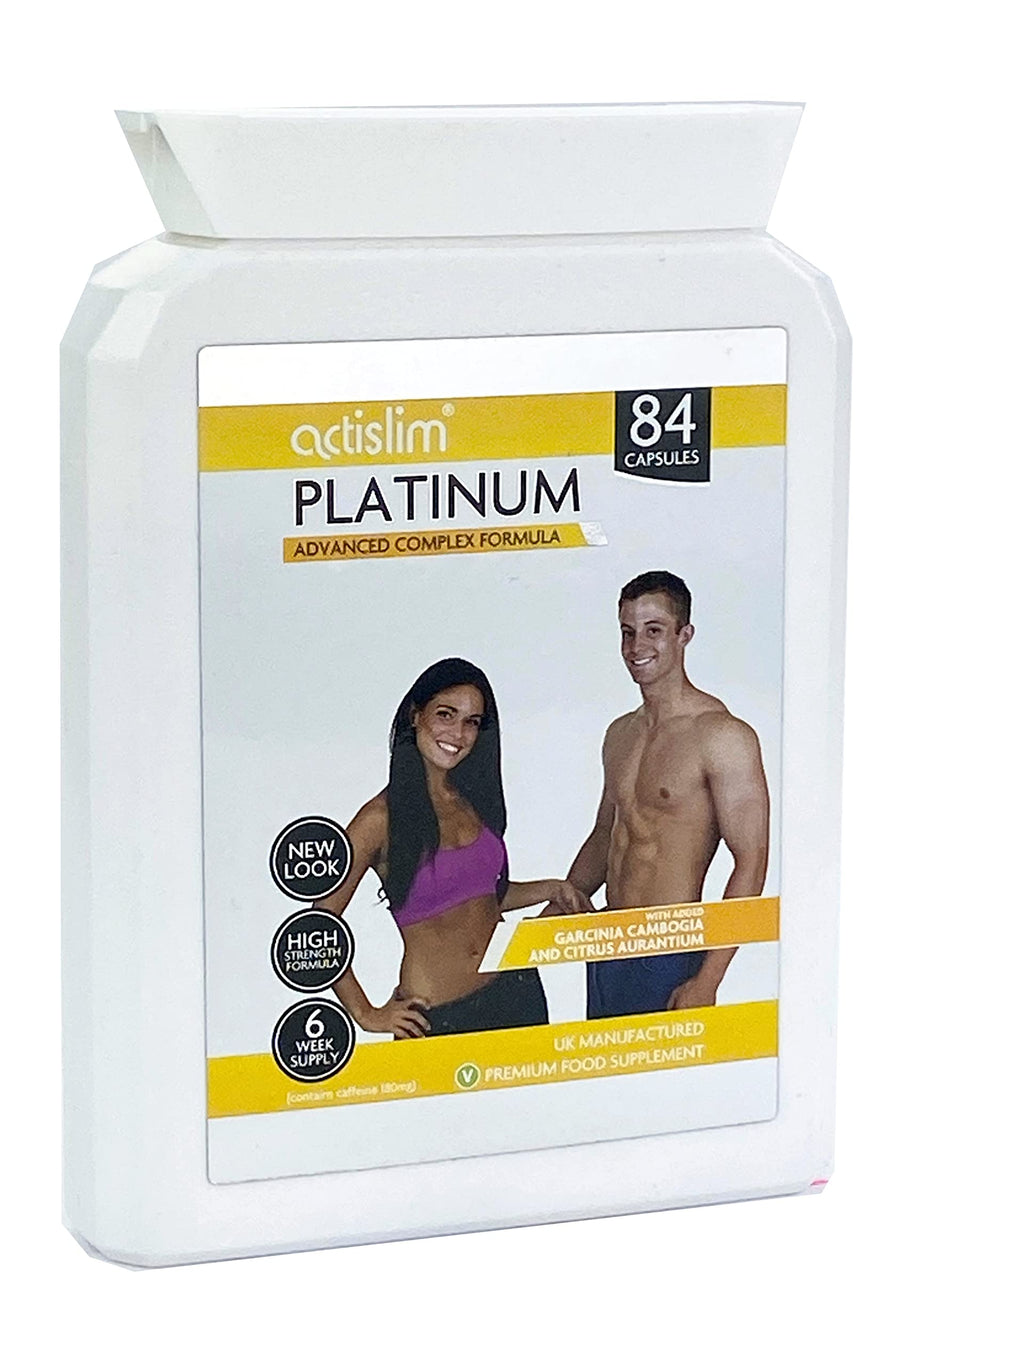 Actislim Platinum The UK’s #1 Weight Loss Slimming Pill,Contains Garcinia Cambogia, Citrus Aurantium and Caffeine for Fast Weight Loss,6 Week Course of a Diet Pill which Really Works. - BeesActive Australia